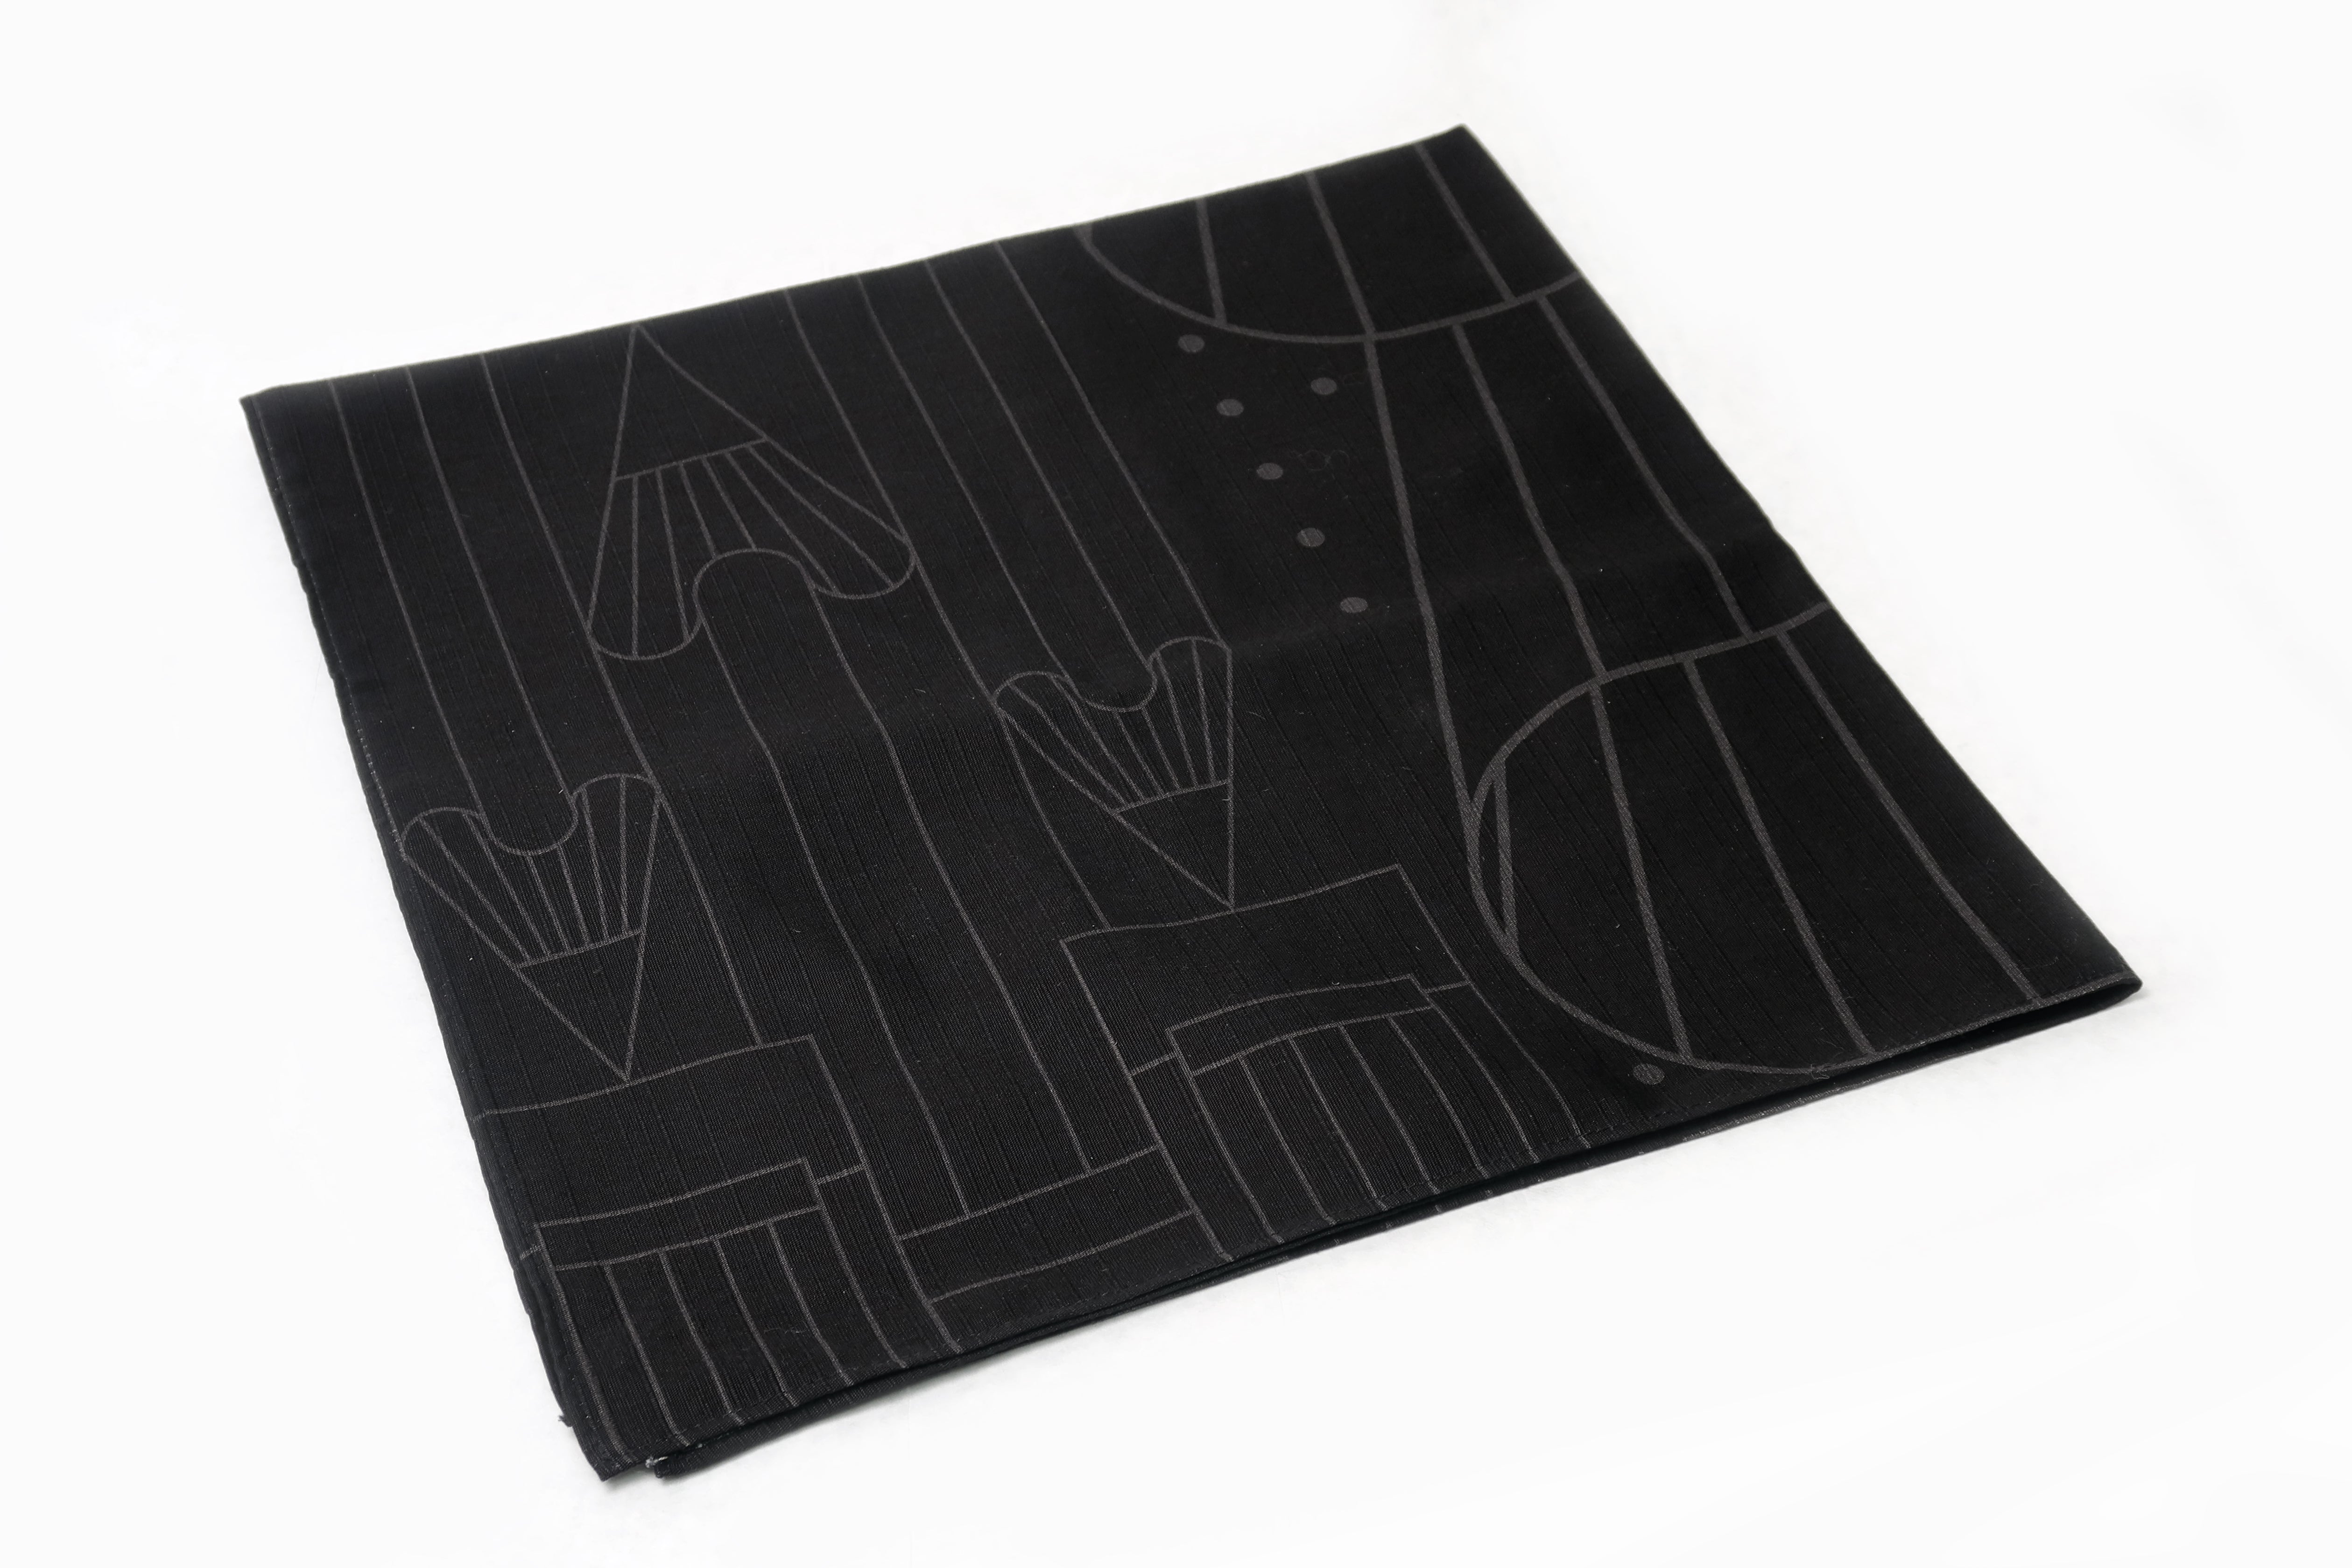 A Blackwing Furoshiki (Japanese Cloth Wrapping Paper) with a stylish drawing on it.